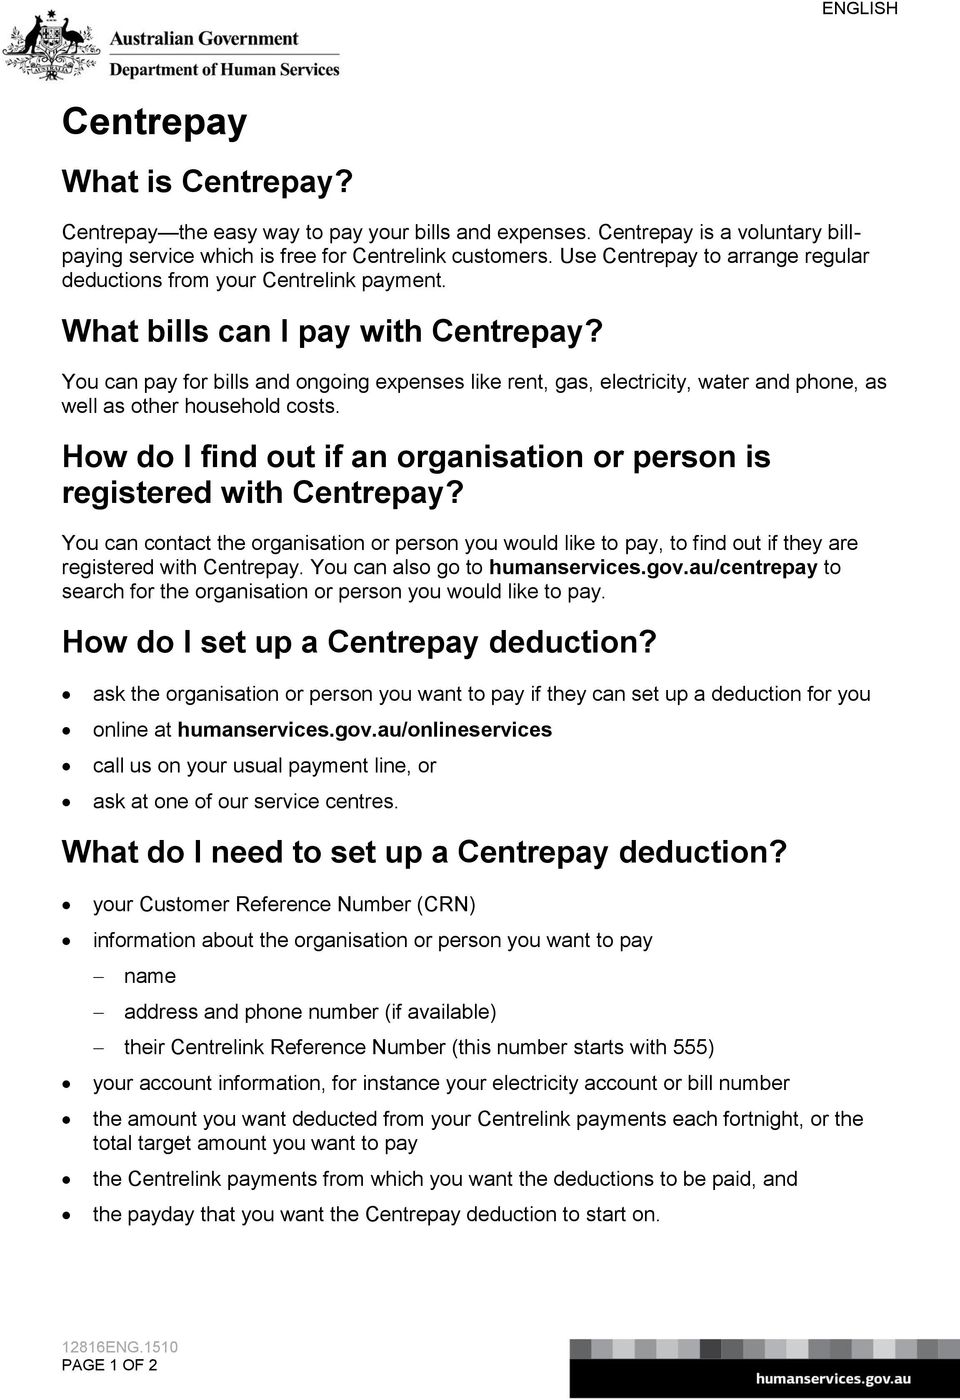 You can pay for bills and ongoing expenses like rent, gas, electricity, water and phone, as well as other household costs. How do I find out if an organisation or person is registered with Centrepay?